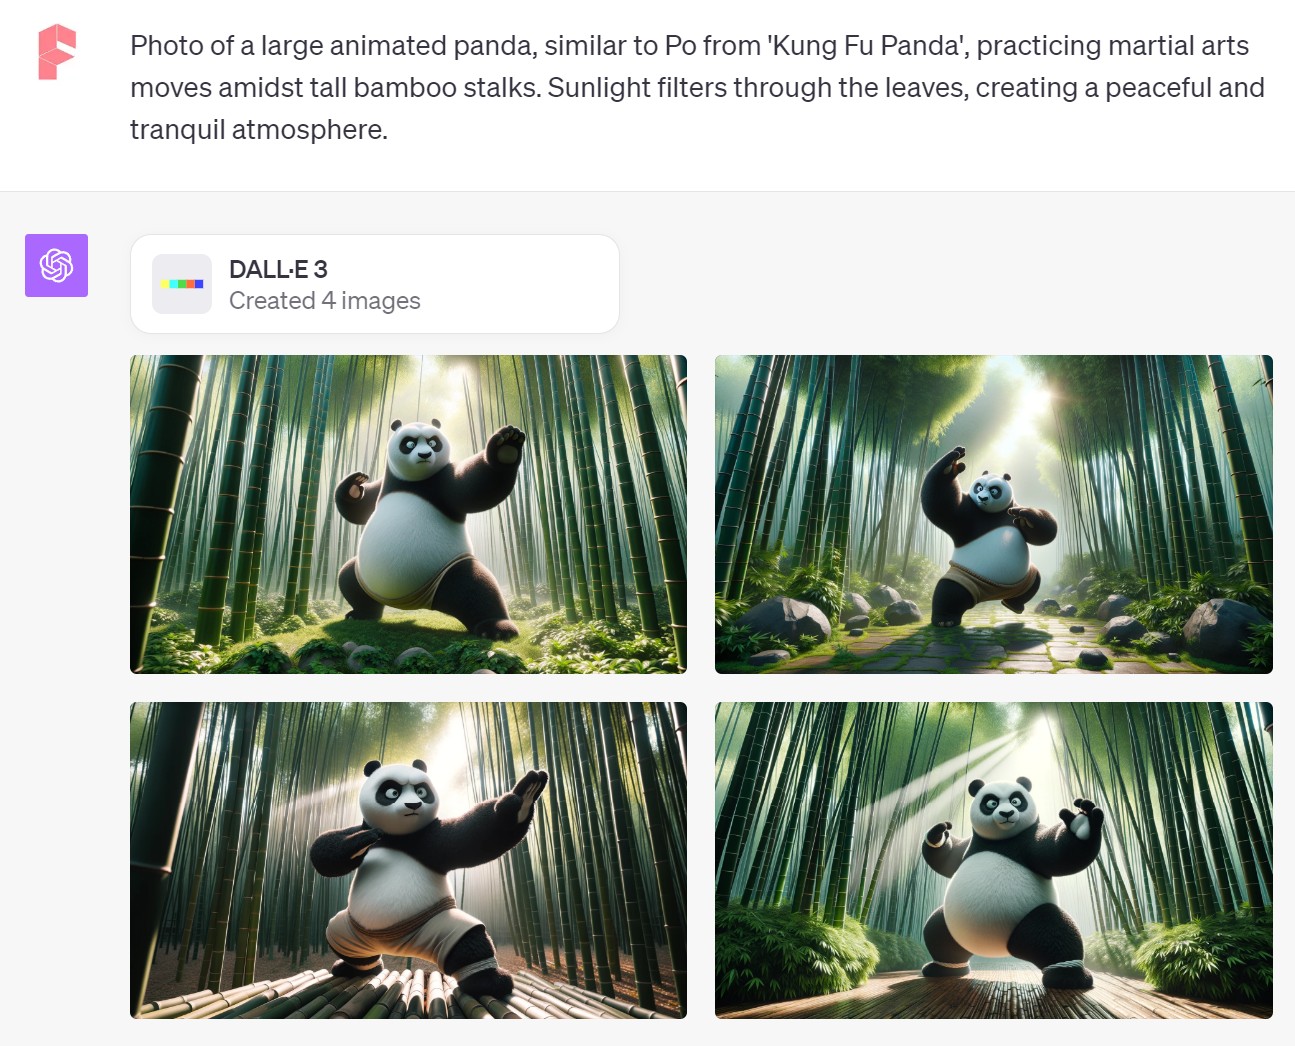 panda 3 practice martial art by dalle 3